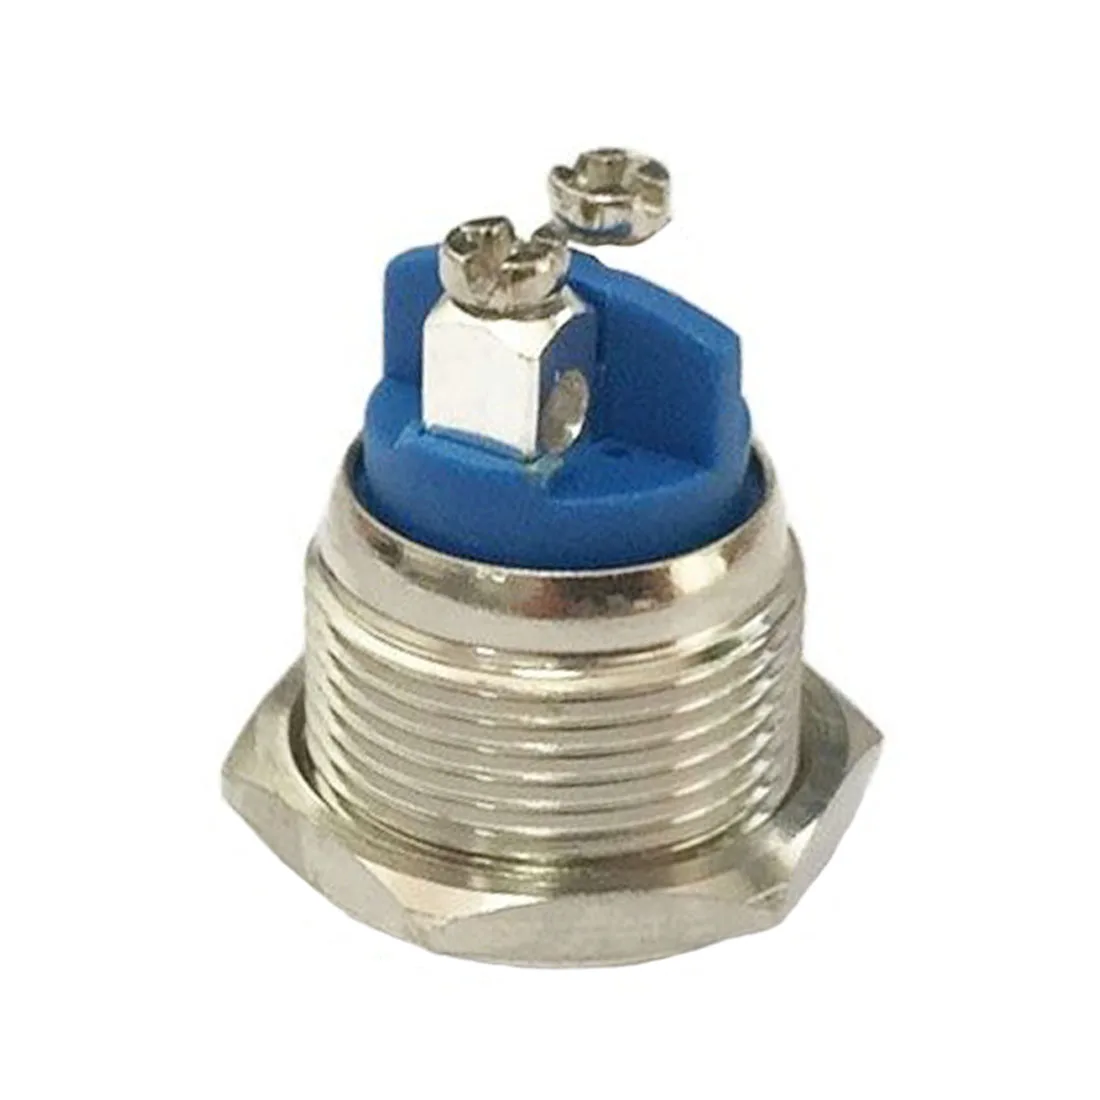 

5pcs 16mm Start Horn Button Momentary Stainless Steel Metal Push Button Switch Reset Switches